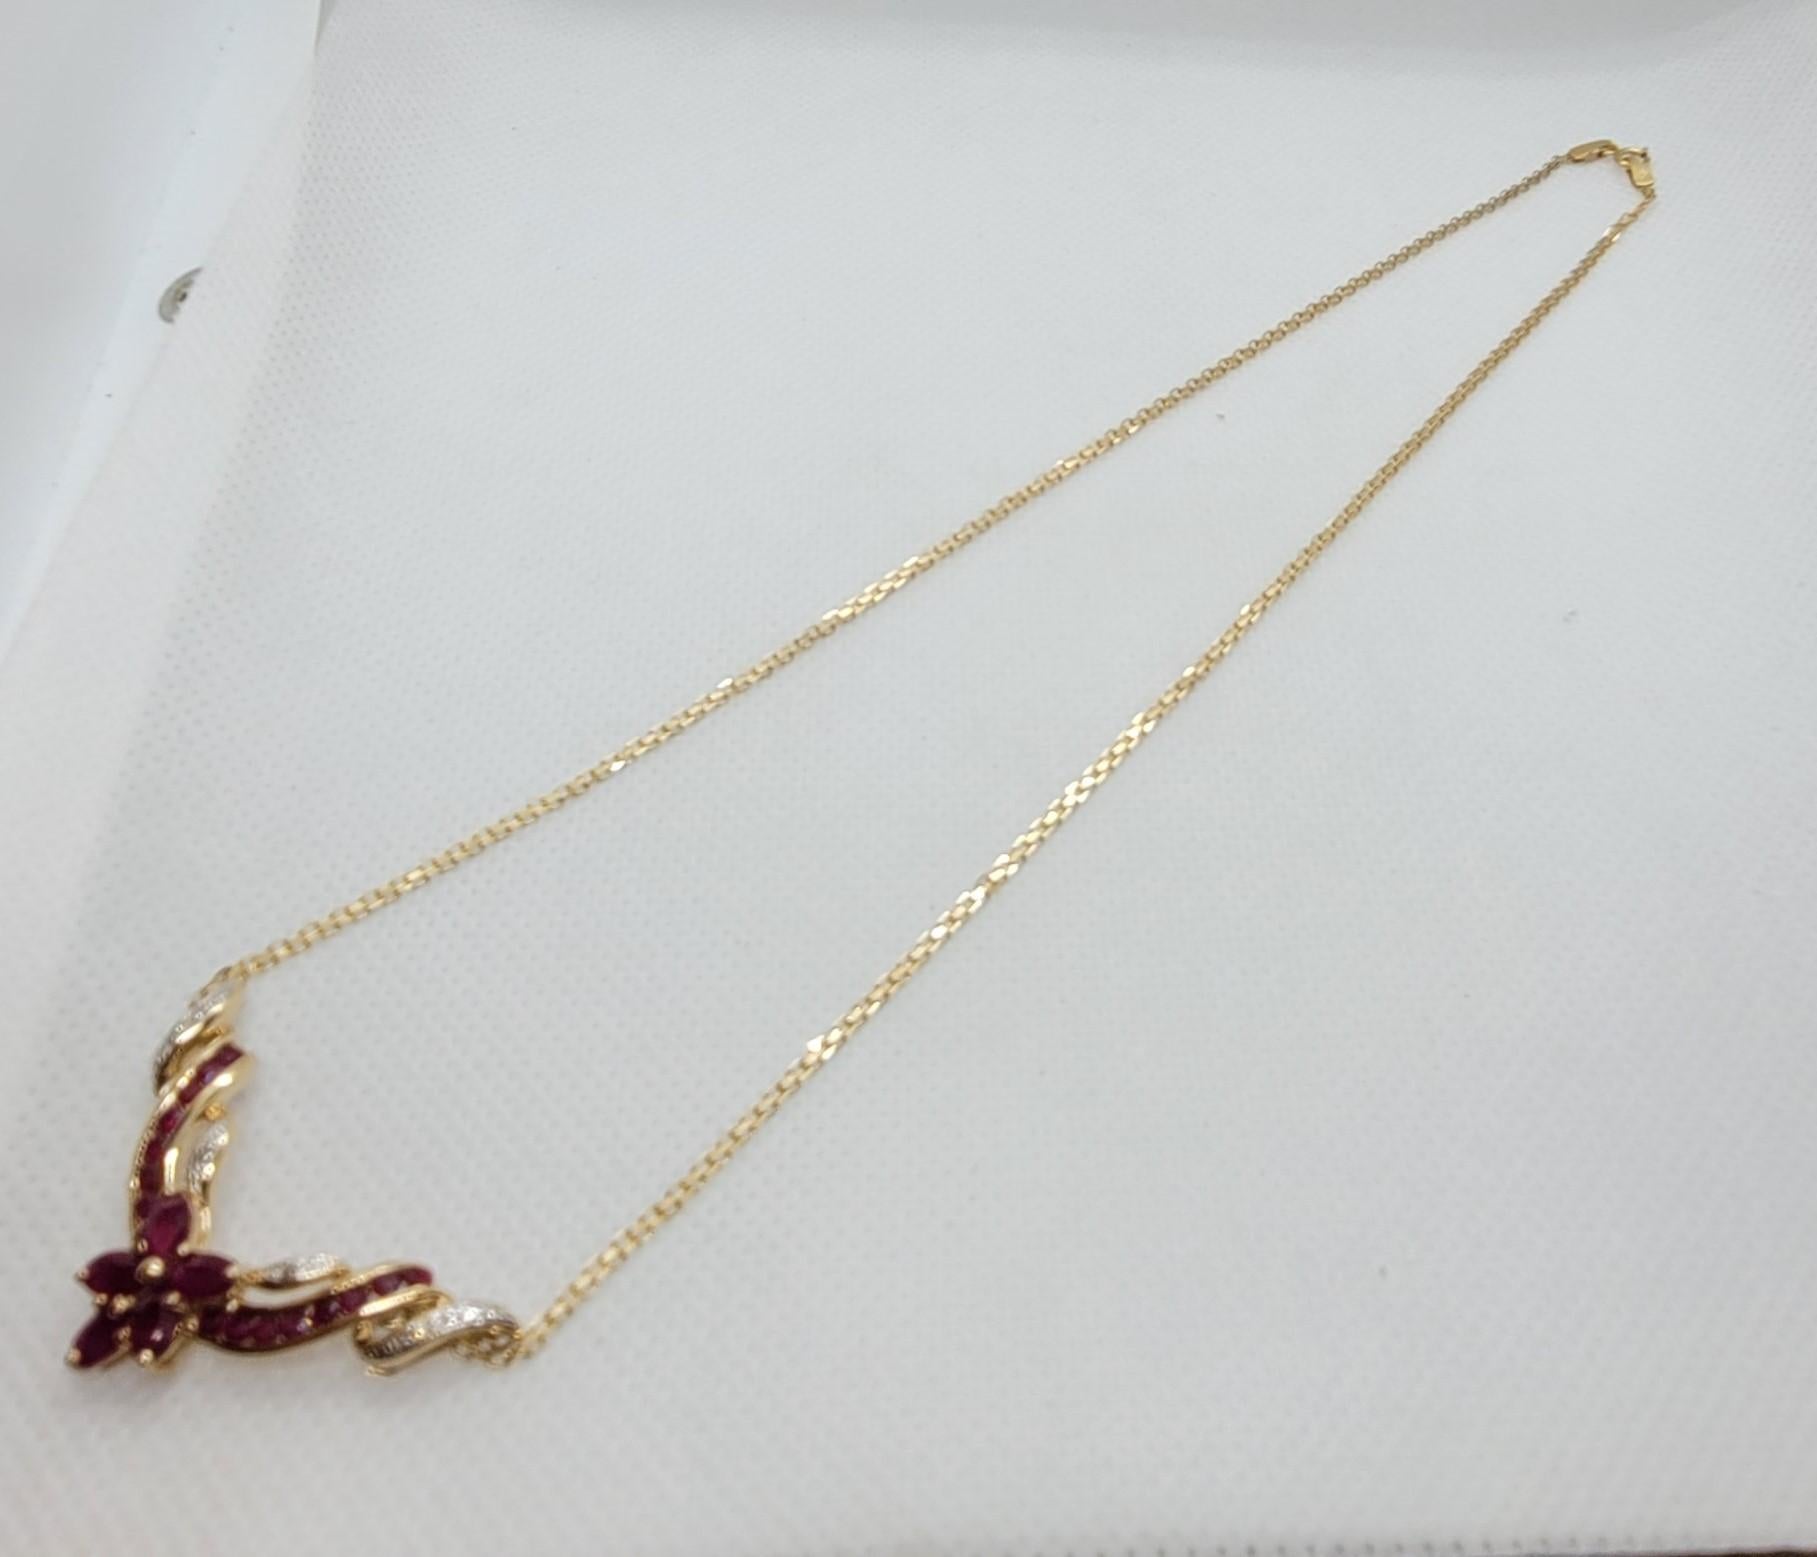 Modern 10kt Yellow Gold Ruby Diamond Necklace 17.5 In, 1.75cttw Rubies, .05cttw Diamond For Sale